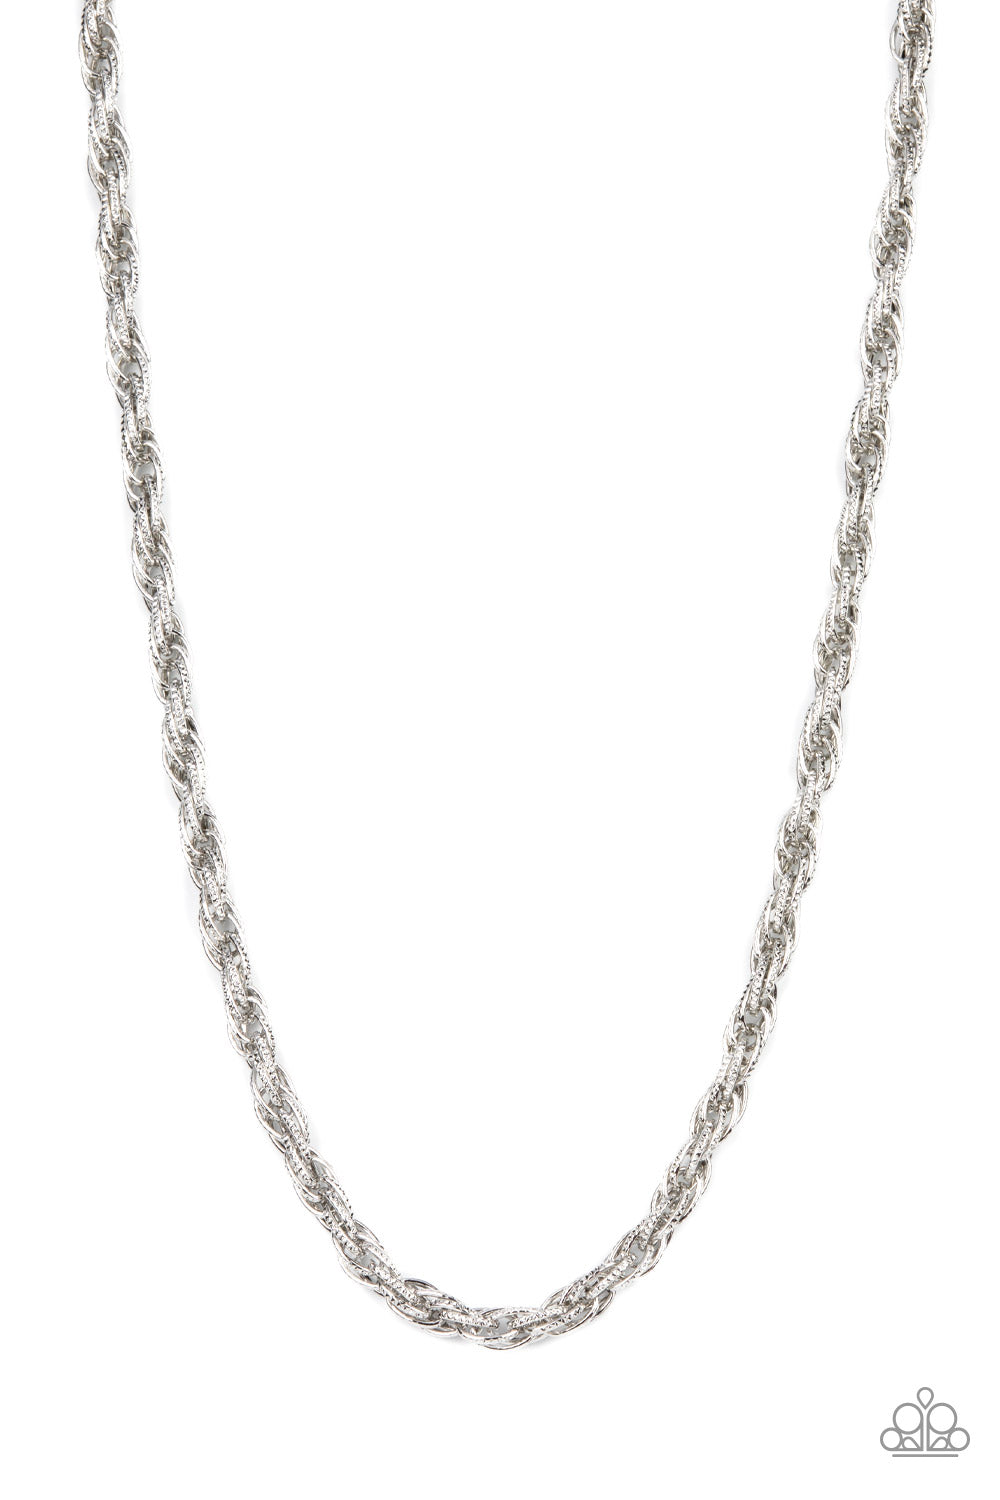 Pit Stop Silver Necklace - Paparazzi Accessories  Featuring diamond cut edges, oval silver links triple-link across the chest, resulting in an edgy statement. Features an adjustable clasp closure.  Sold as one individual necklace.